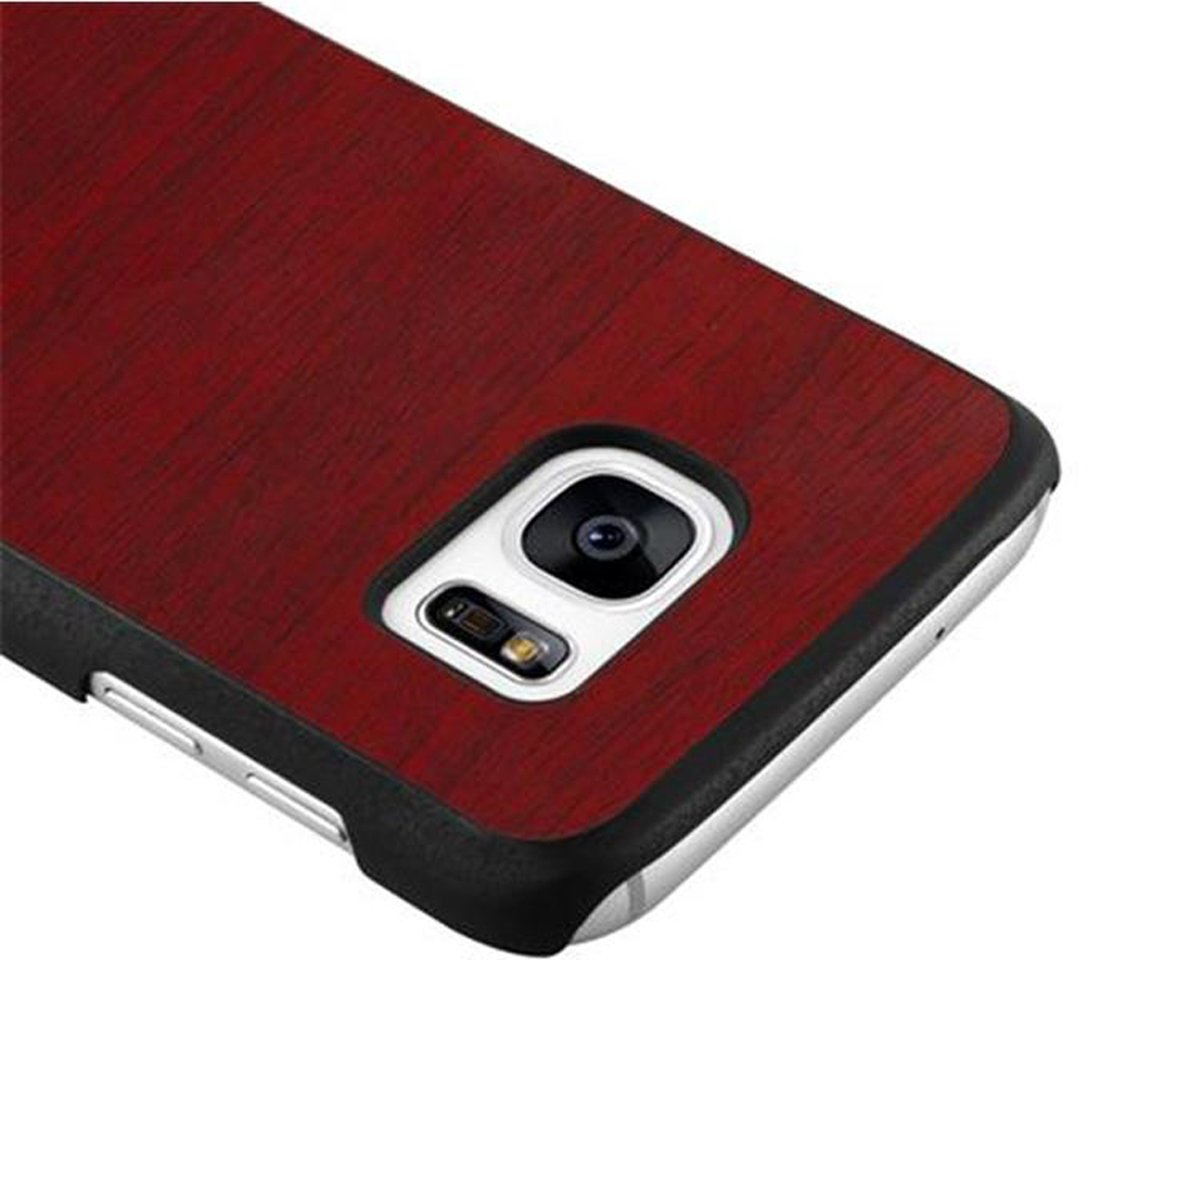 ROT S7, Galaxy Style, Backcover, Samsung, CADORABO Hard Hülle WOODY Case Woody